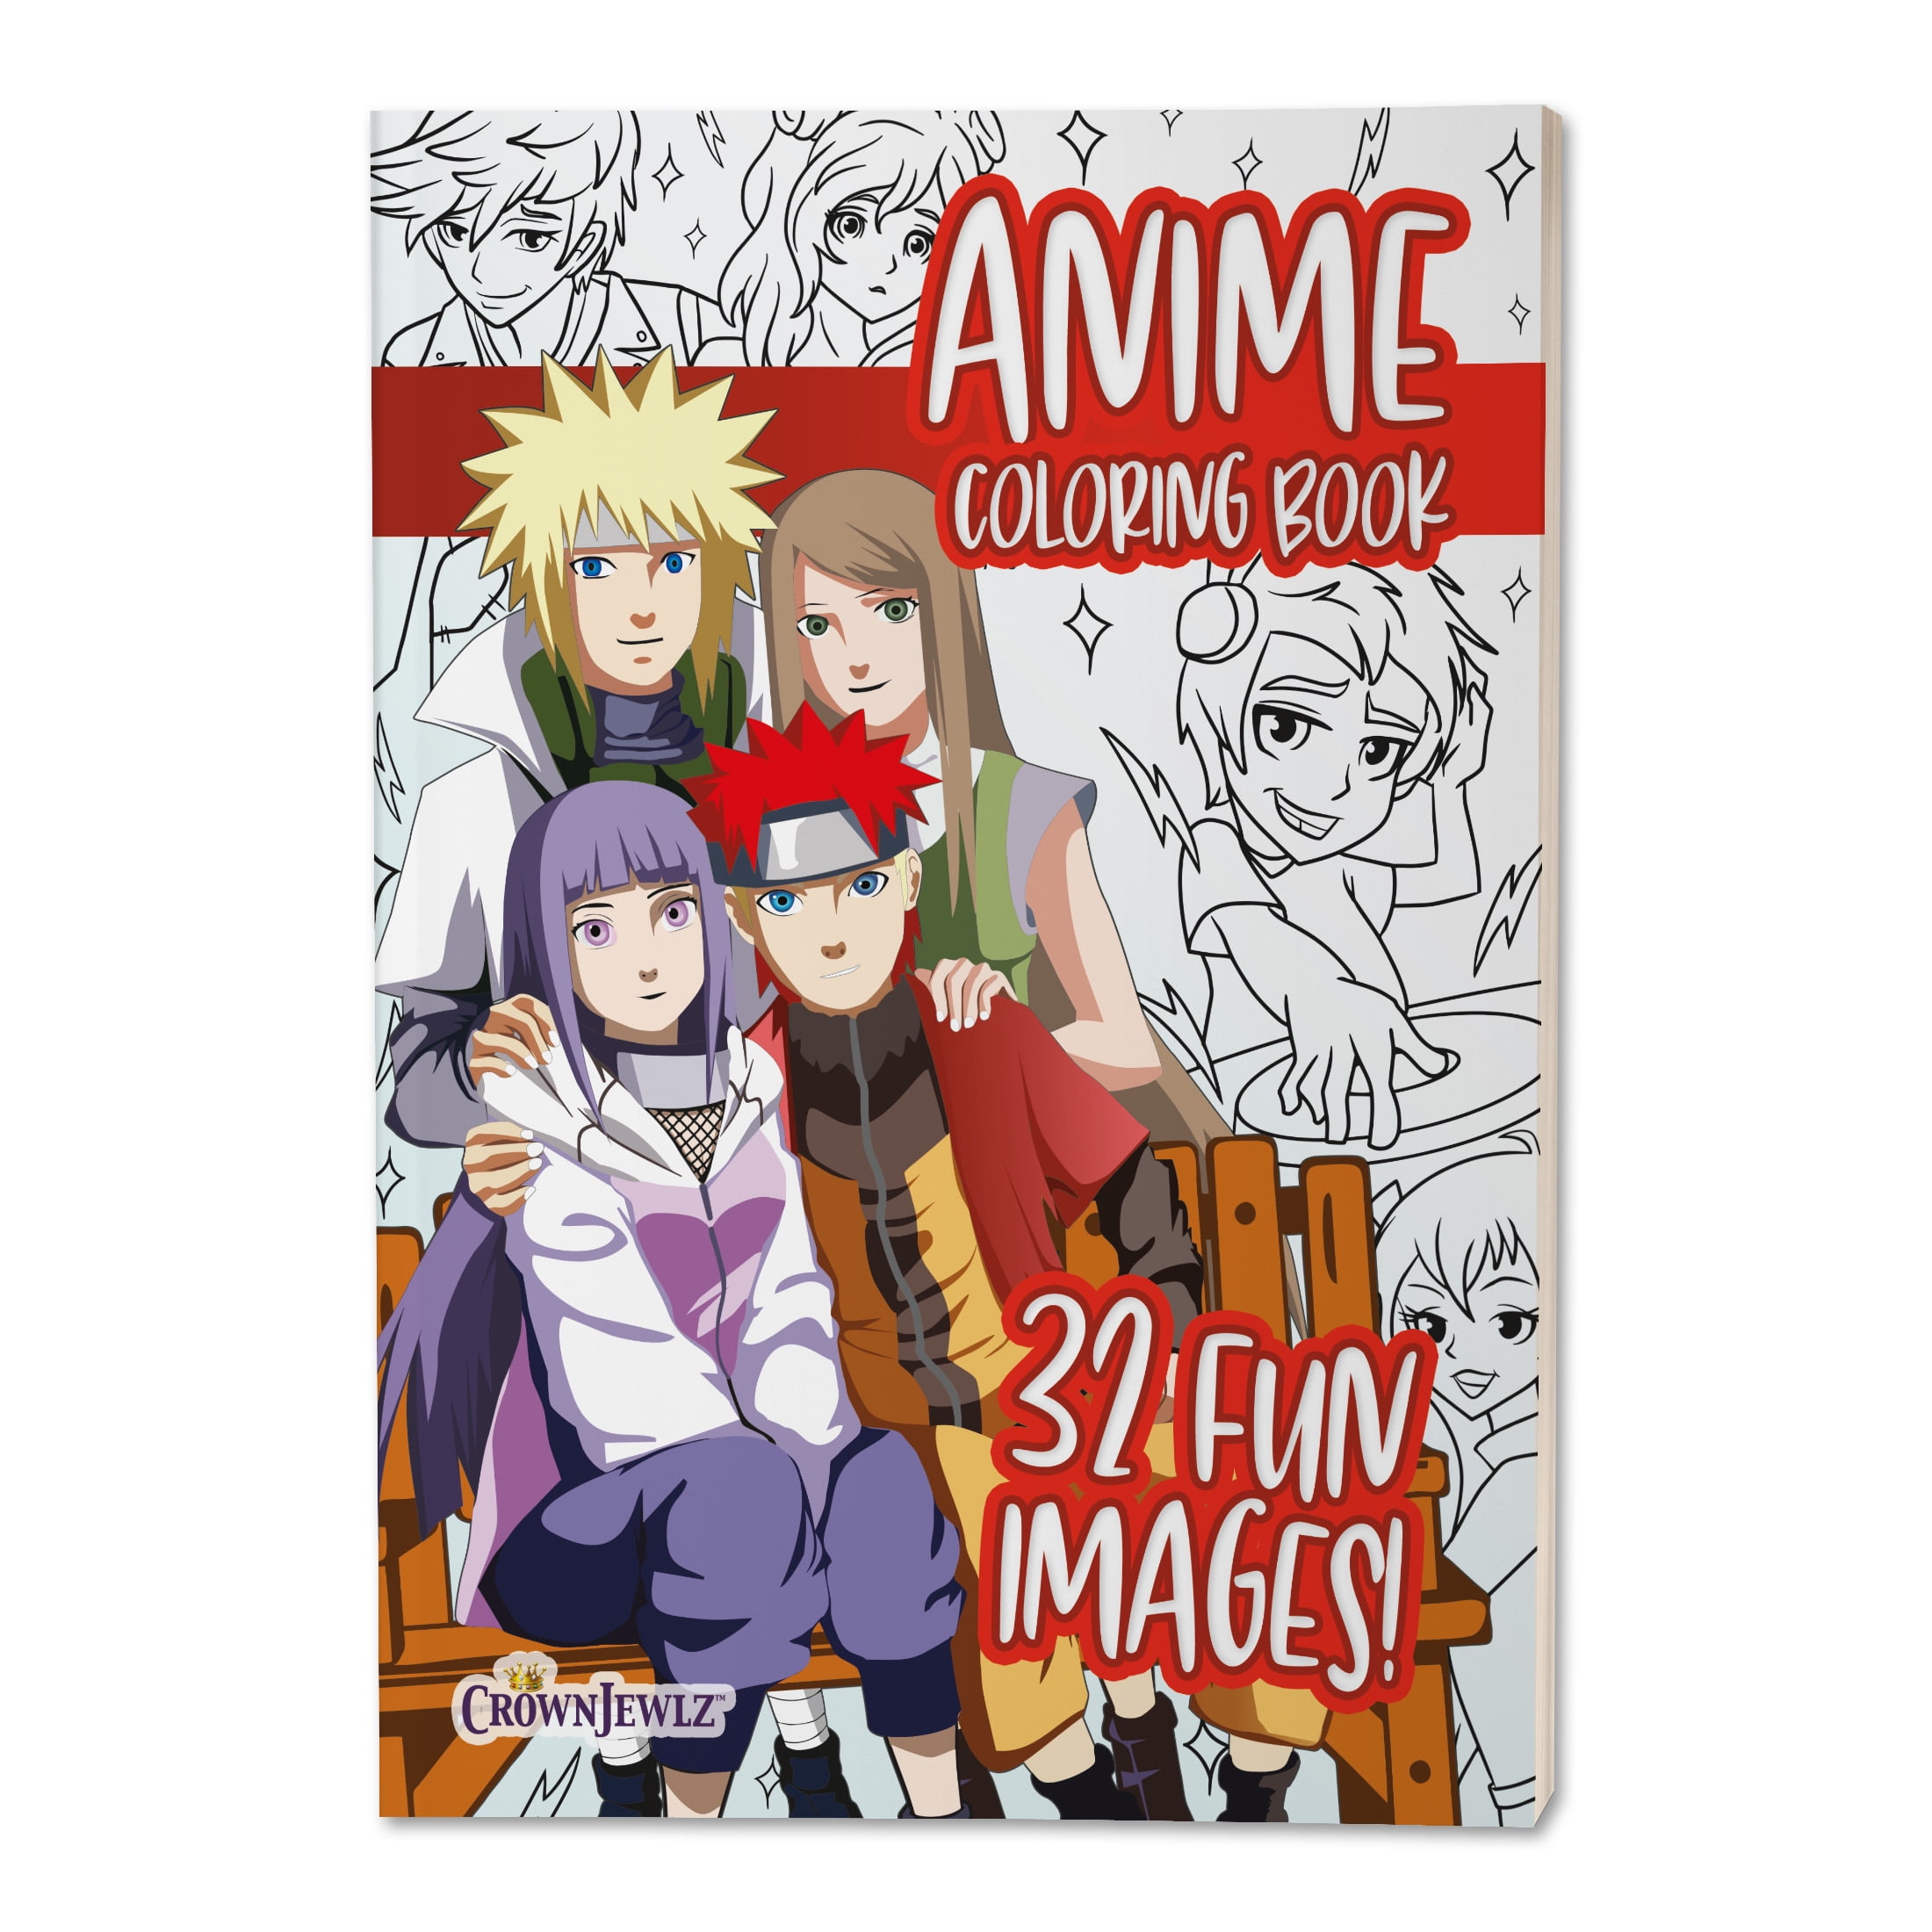 Anime coloring book I spyed at Dollar Tree : r/Naruto